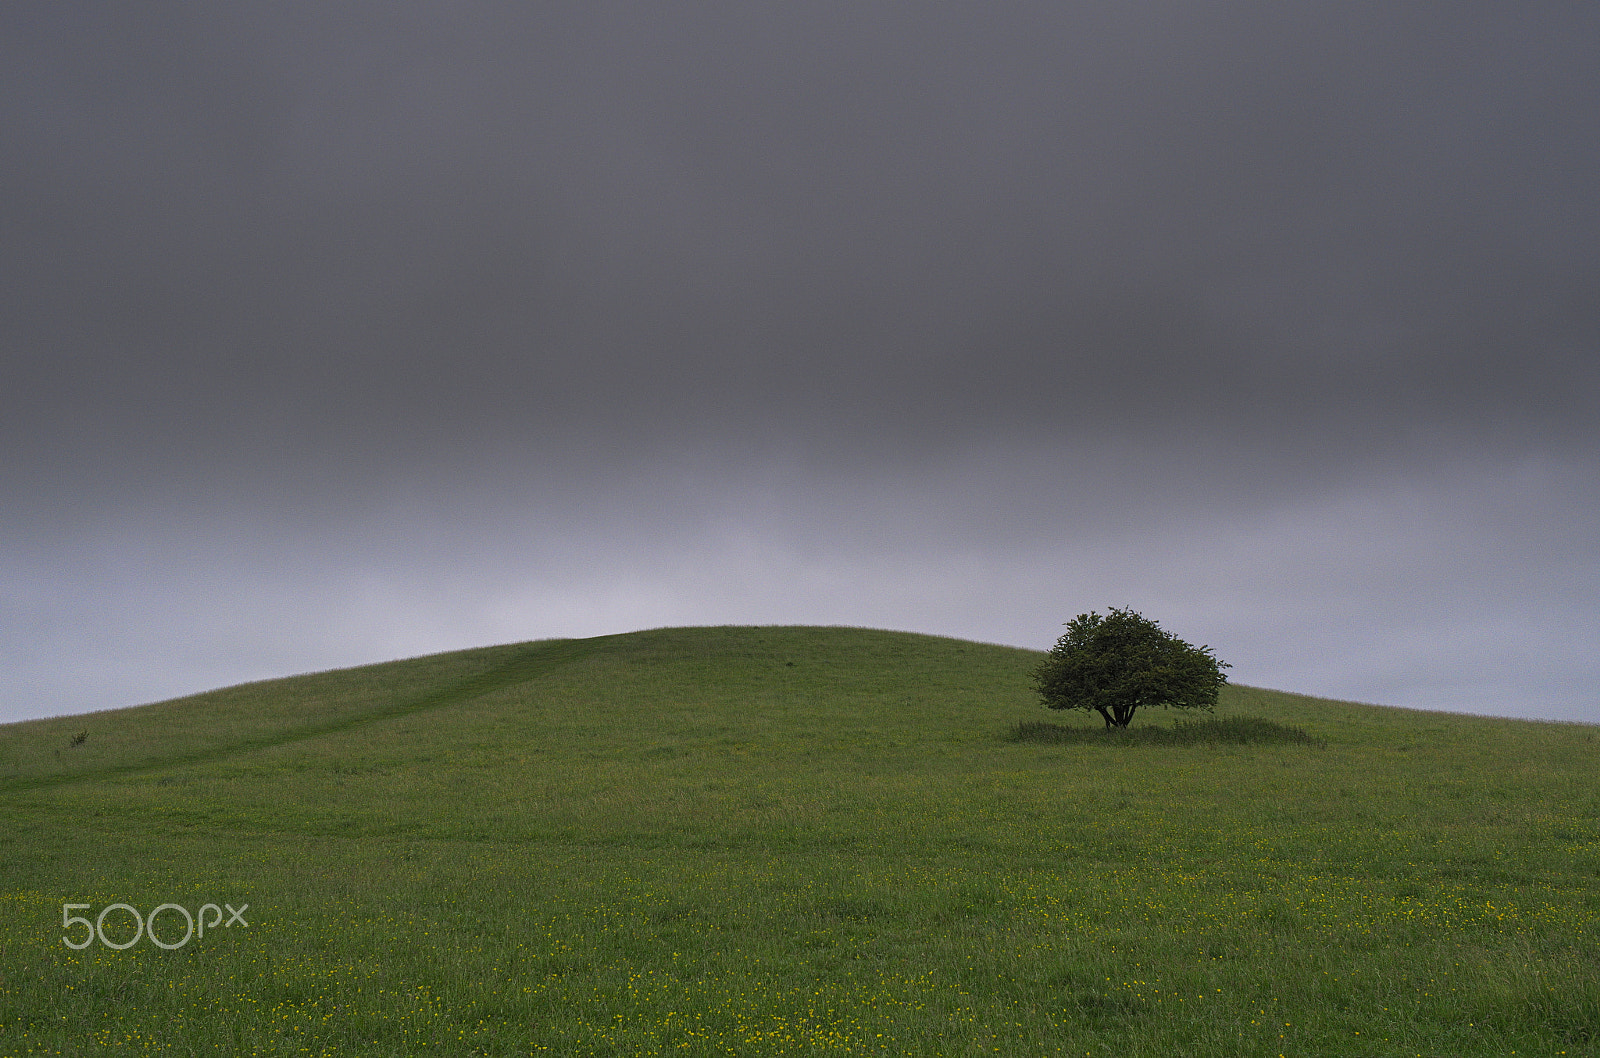 Leica X2 sample photo. Small green hill with lone tree photography